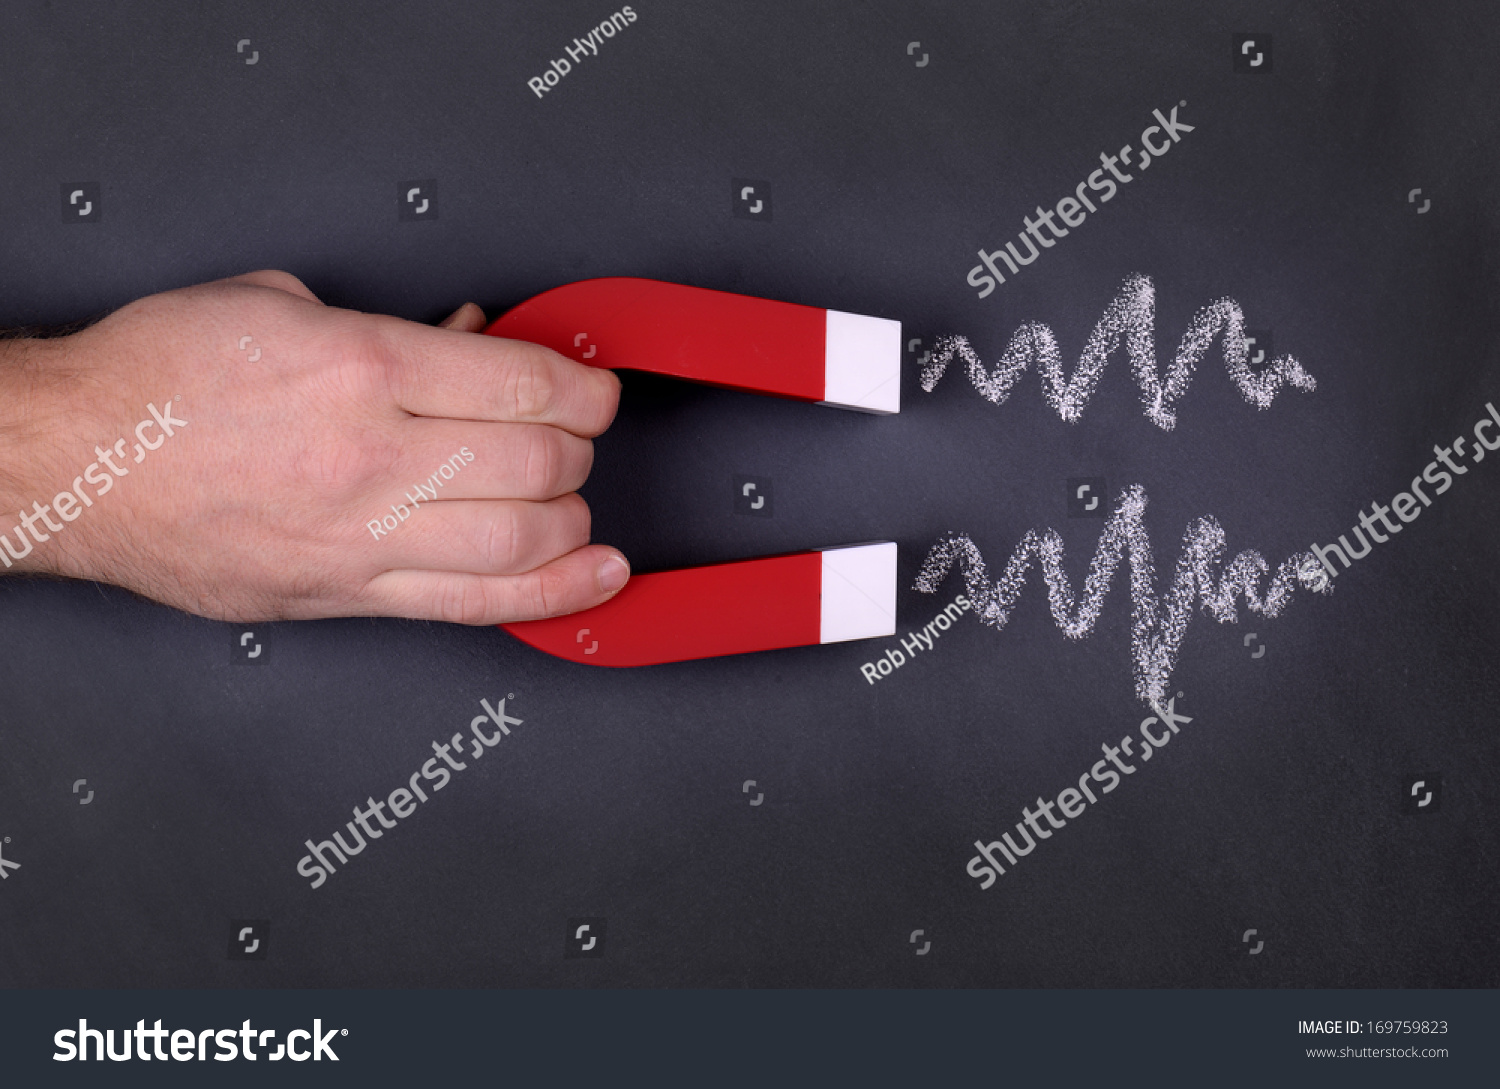 A magnet with zig zag lines showing attraction on a chalk board #169759823